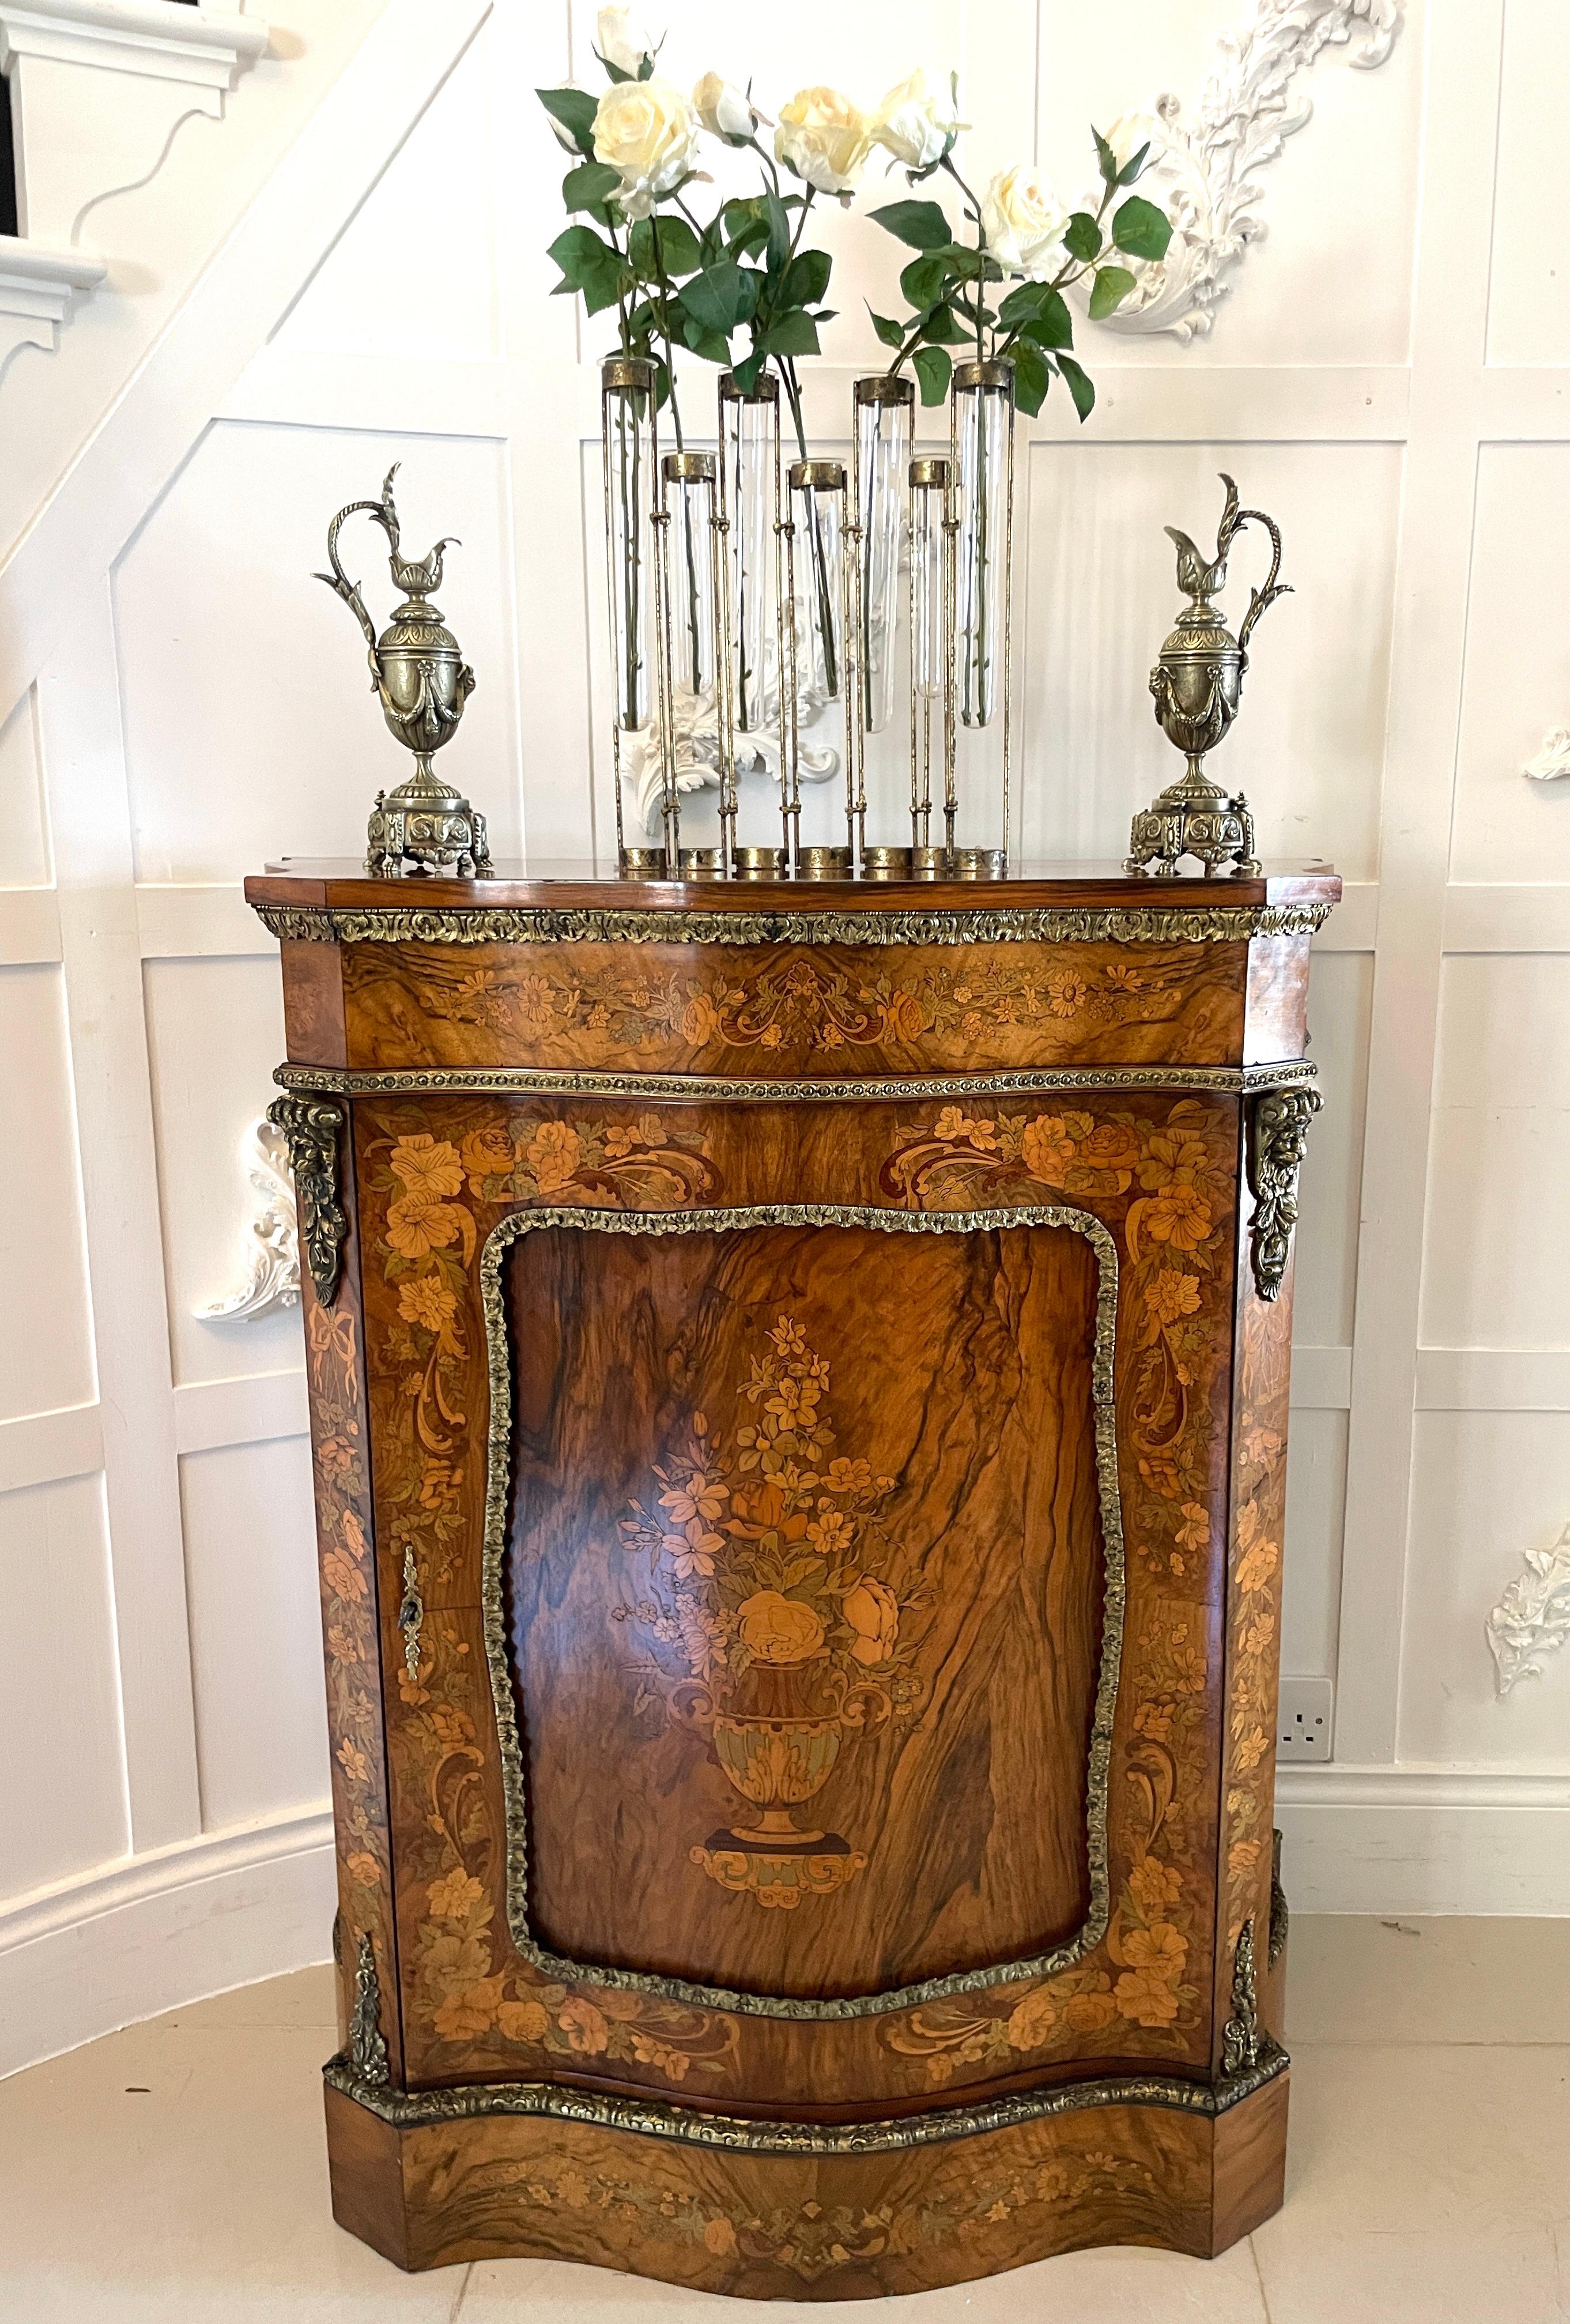 Outstanding quality antique Victorian burr walnut inlaid floral marquetry side cabinet having a serpentine shaped burr walnut top above an inlaid floral marquetry serpentine shaped frieze above a serpentine shaped burr walnut door with outstanding